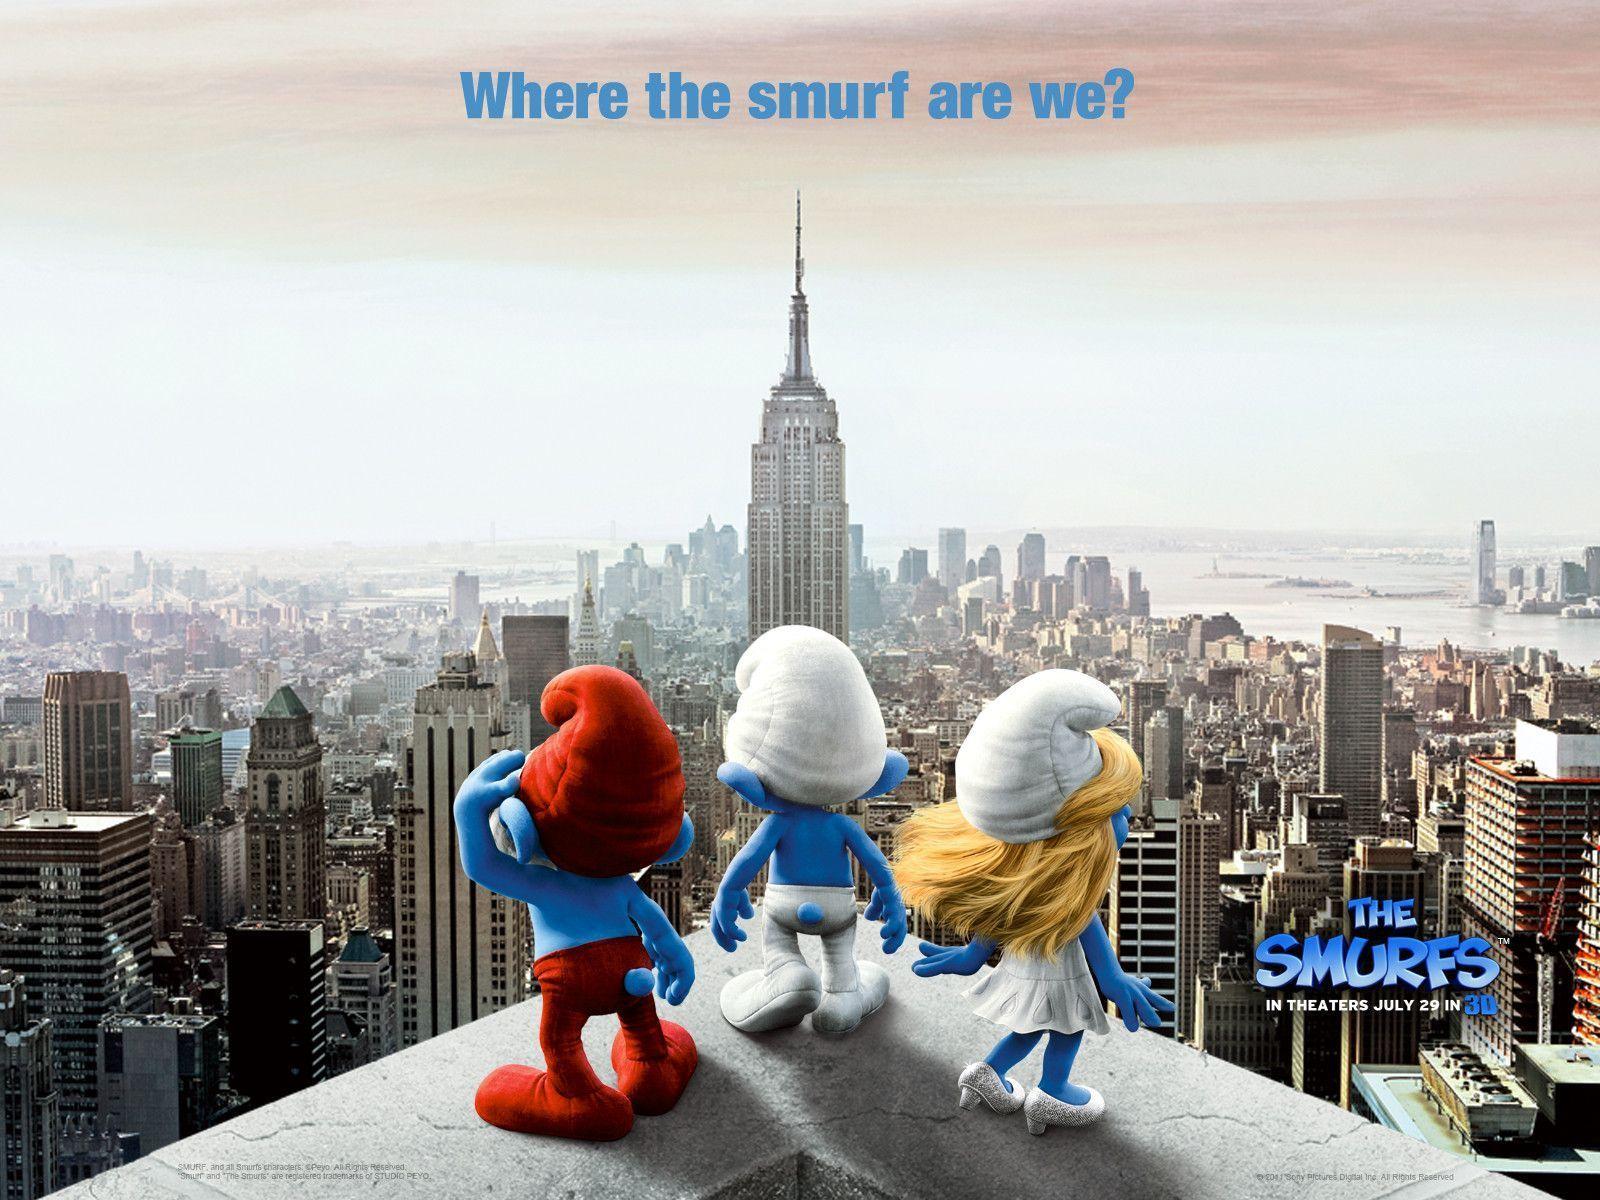 The Smurfs Download Wallpaper Games Free Games